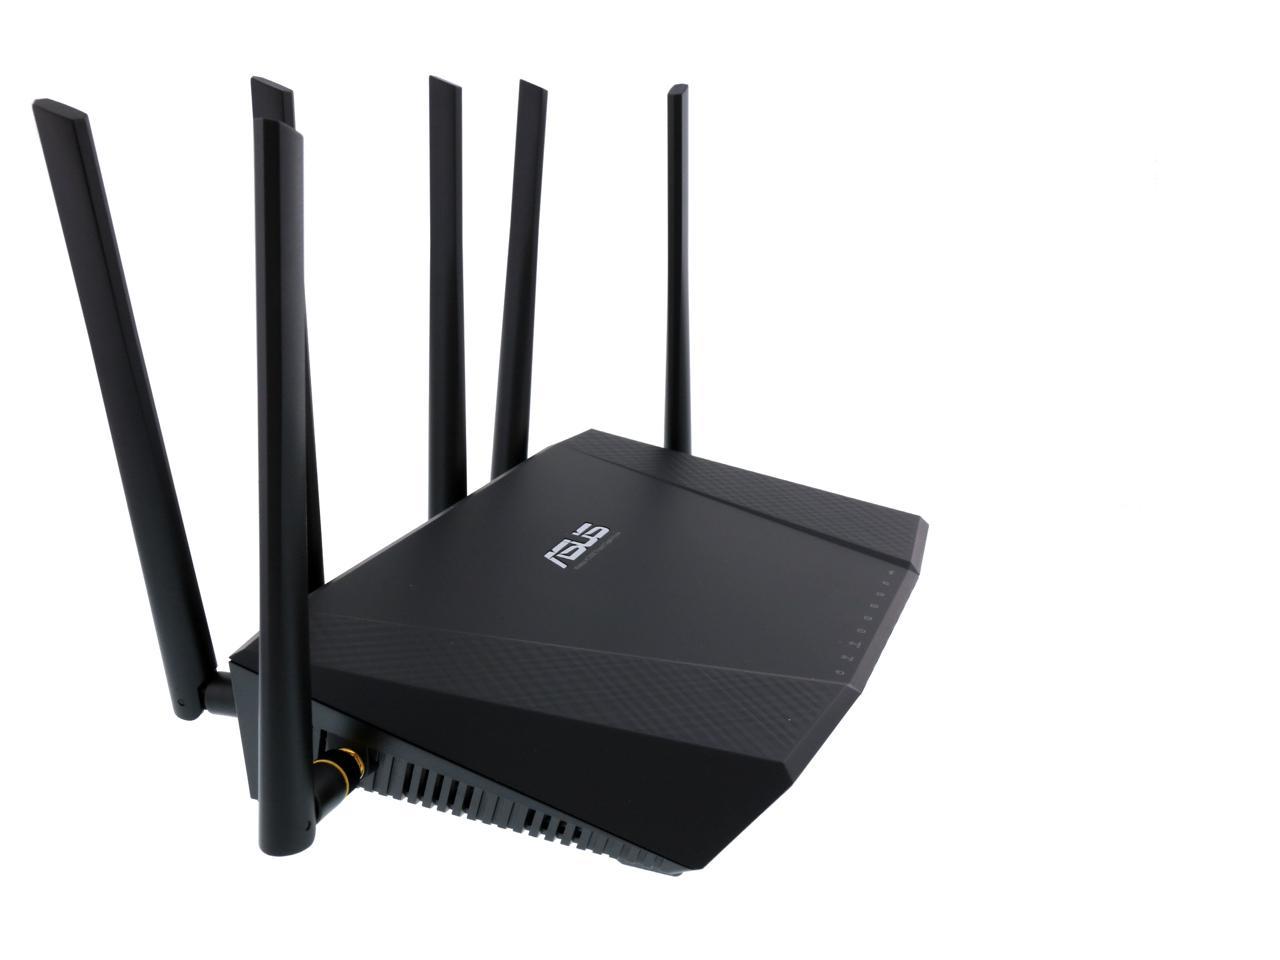 Jeg vil have malm Analytiker ASUS AC3200 Tri-Band Gigabit Wi-Fi Router, AiProtection Lifetime Security  by Trend Micro, Adaptive QoS, Parental Control - Newegg.com